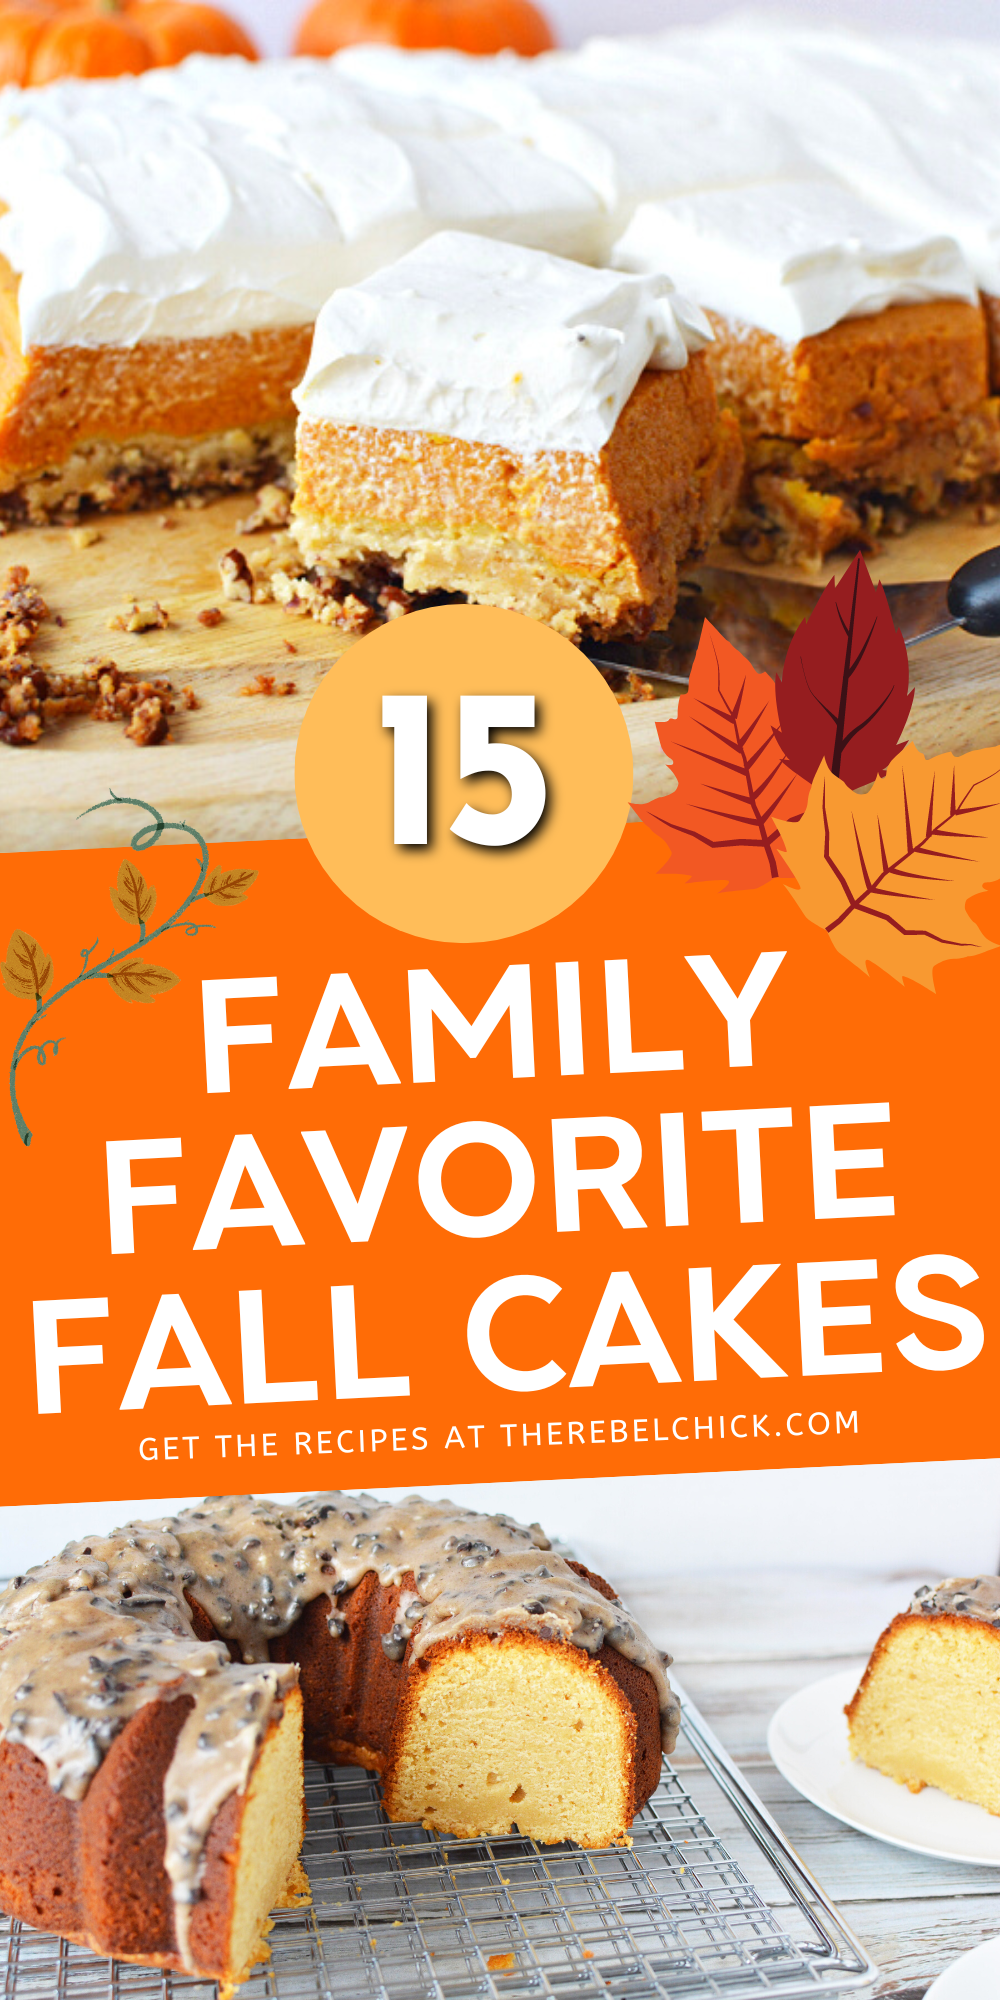 15 Family Favorite Fall Cakes